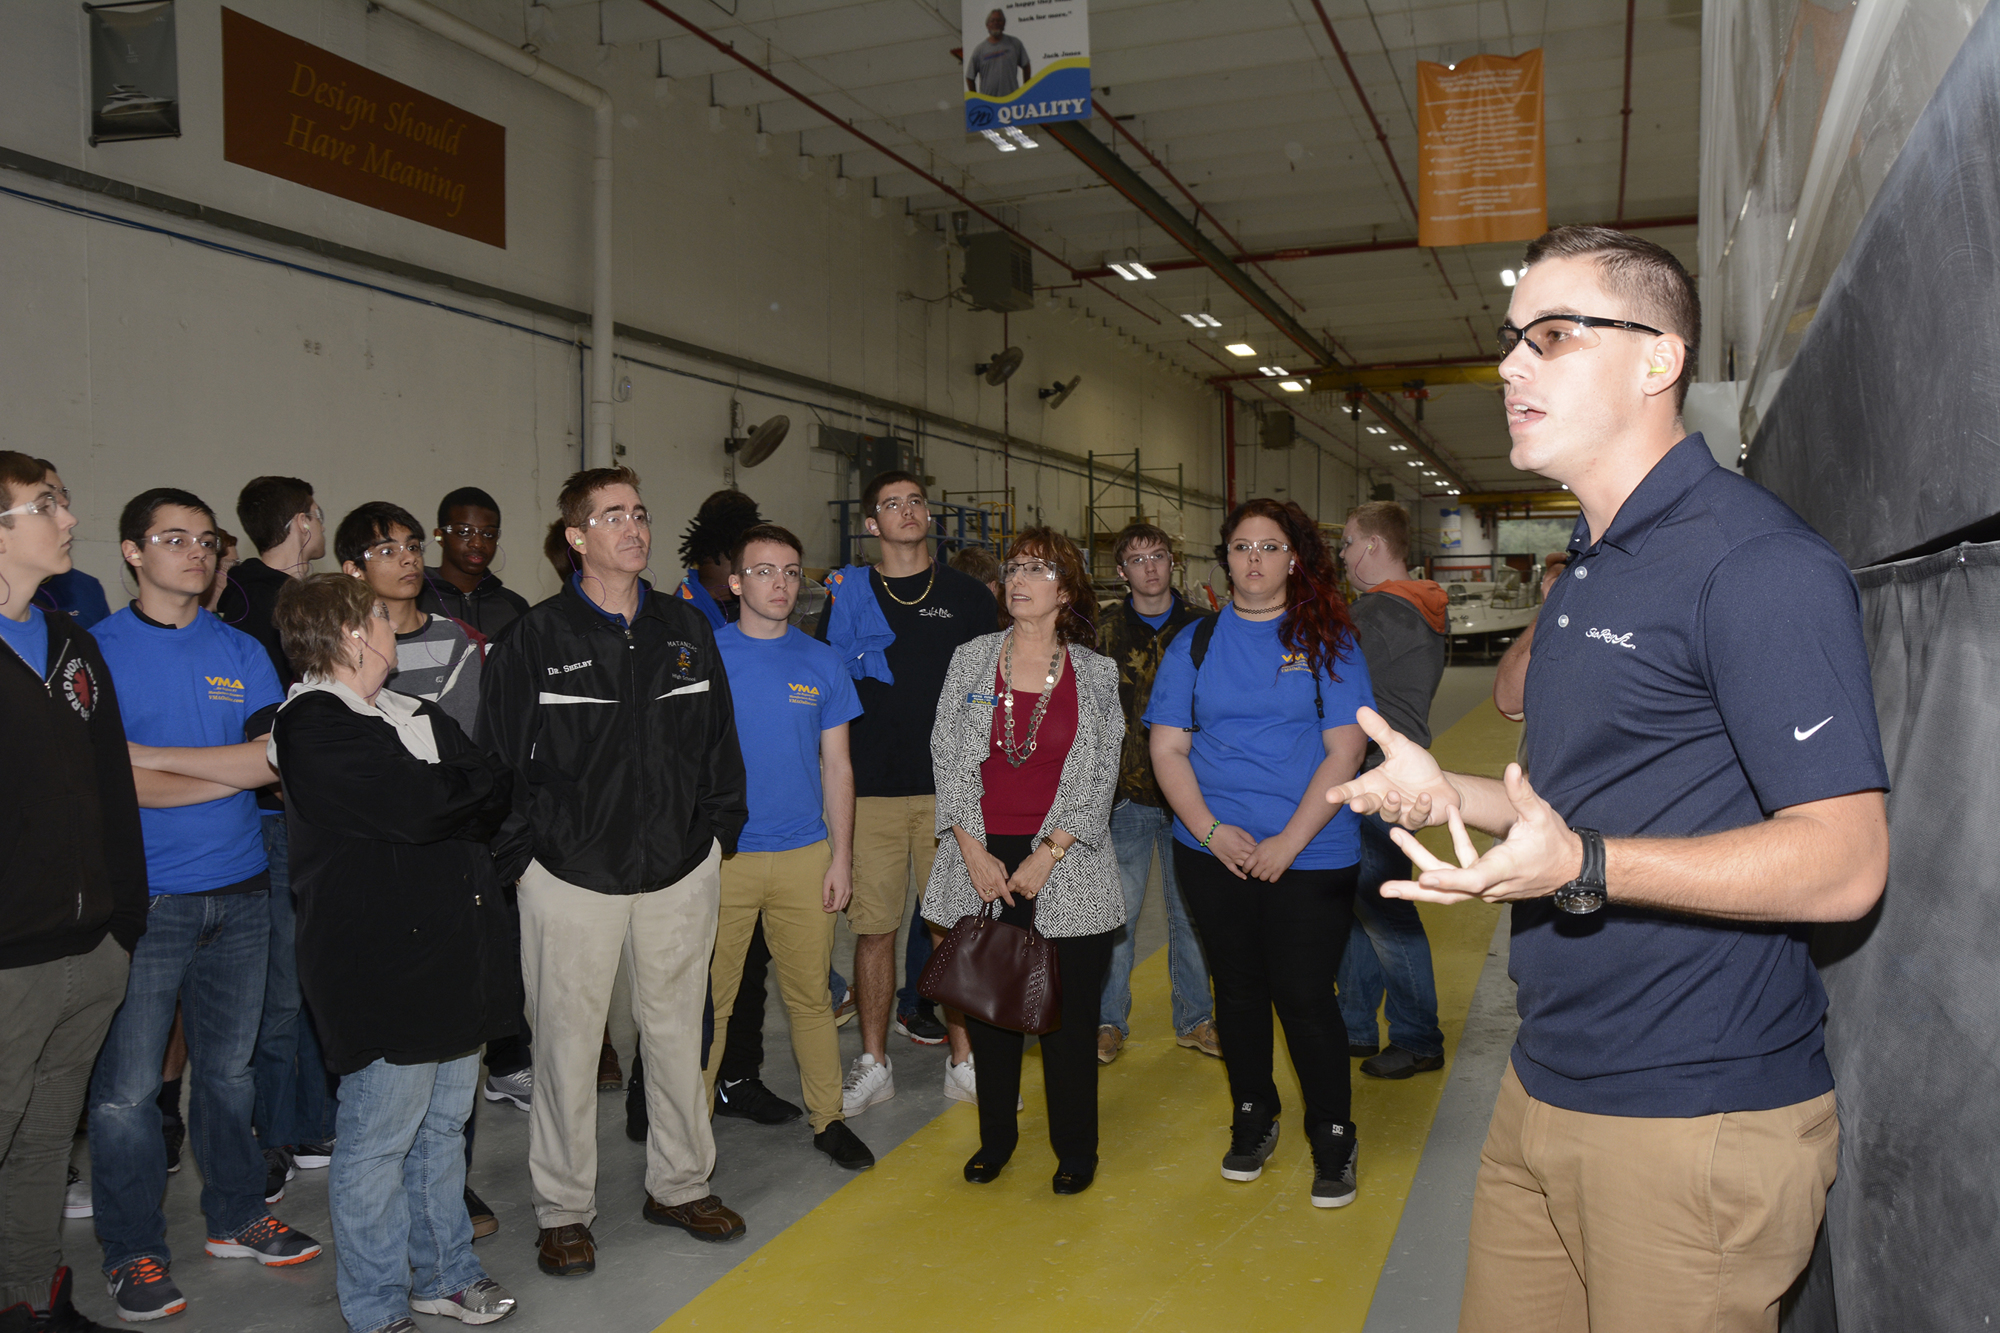 SeaRay Boats Lamination Trainer Chris Lamb gives the students an educational tour of the facility.